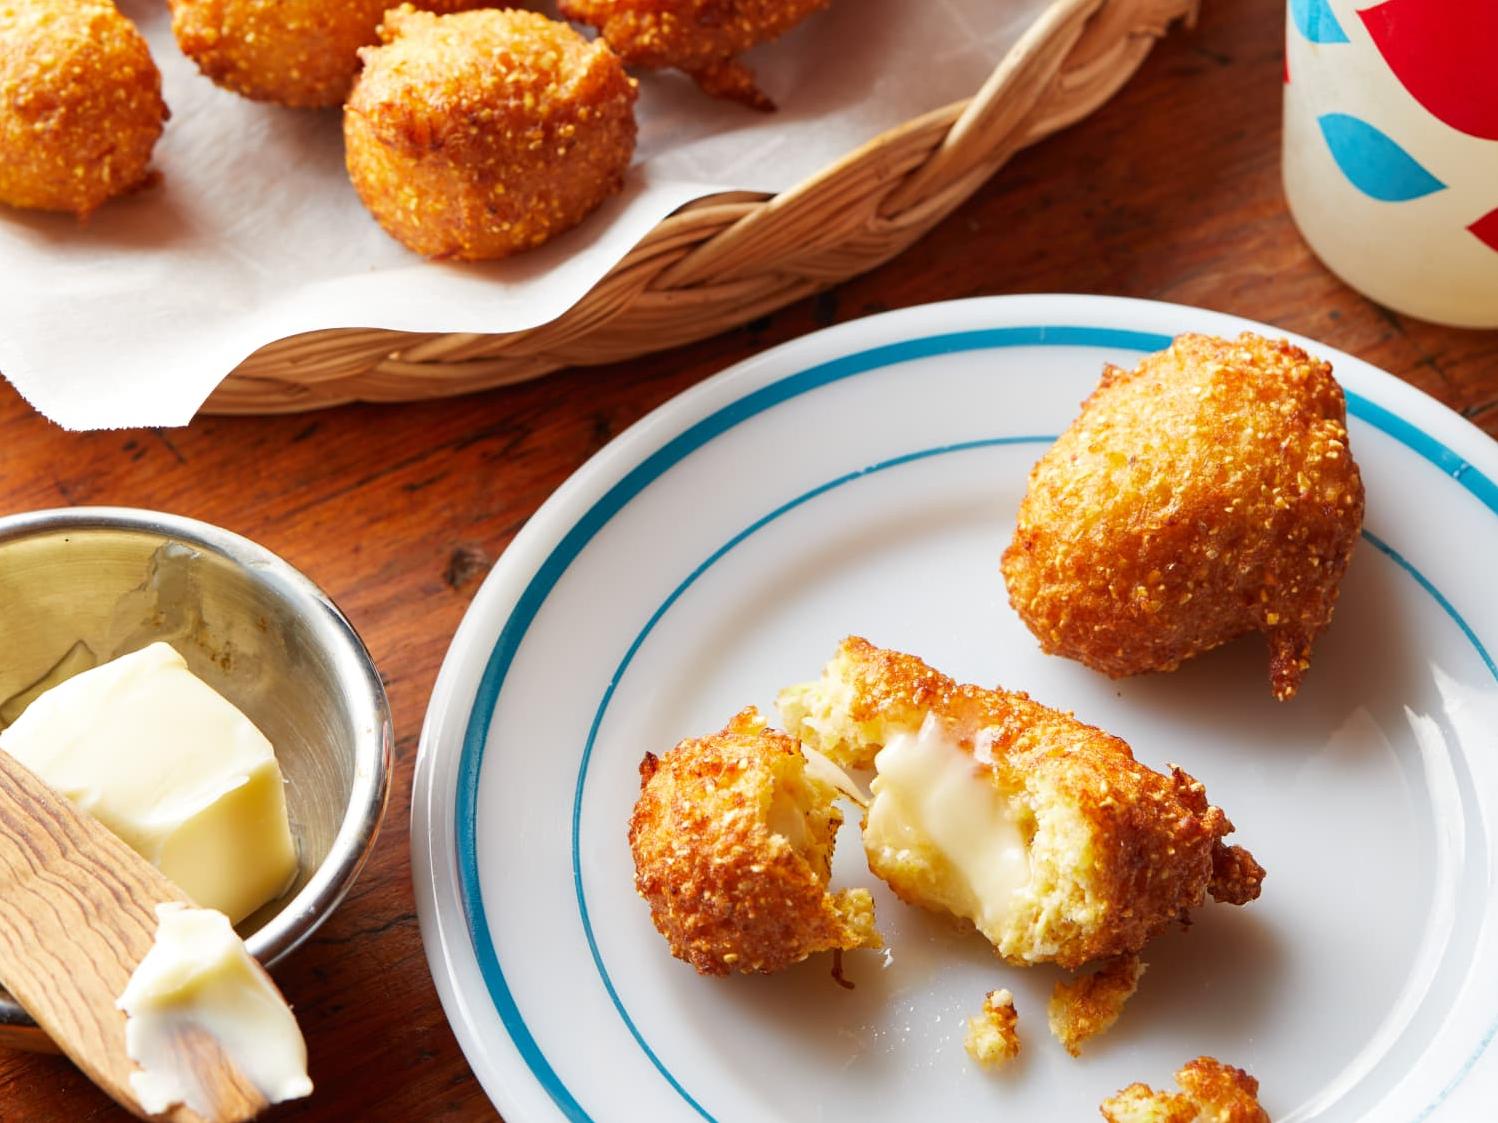  Take a bite of these golden, crispy spheres of flavor!